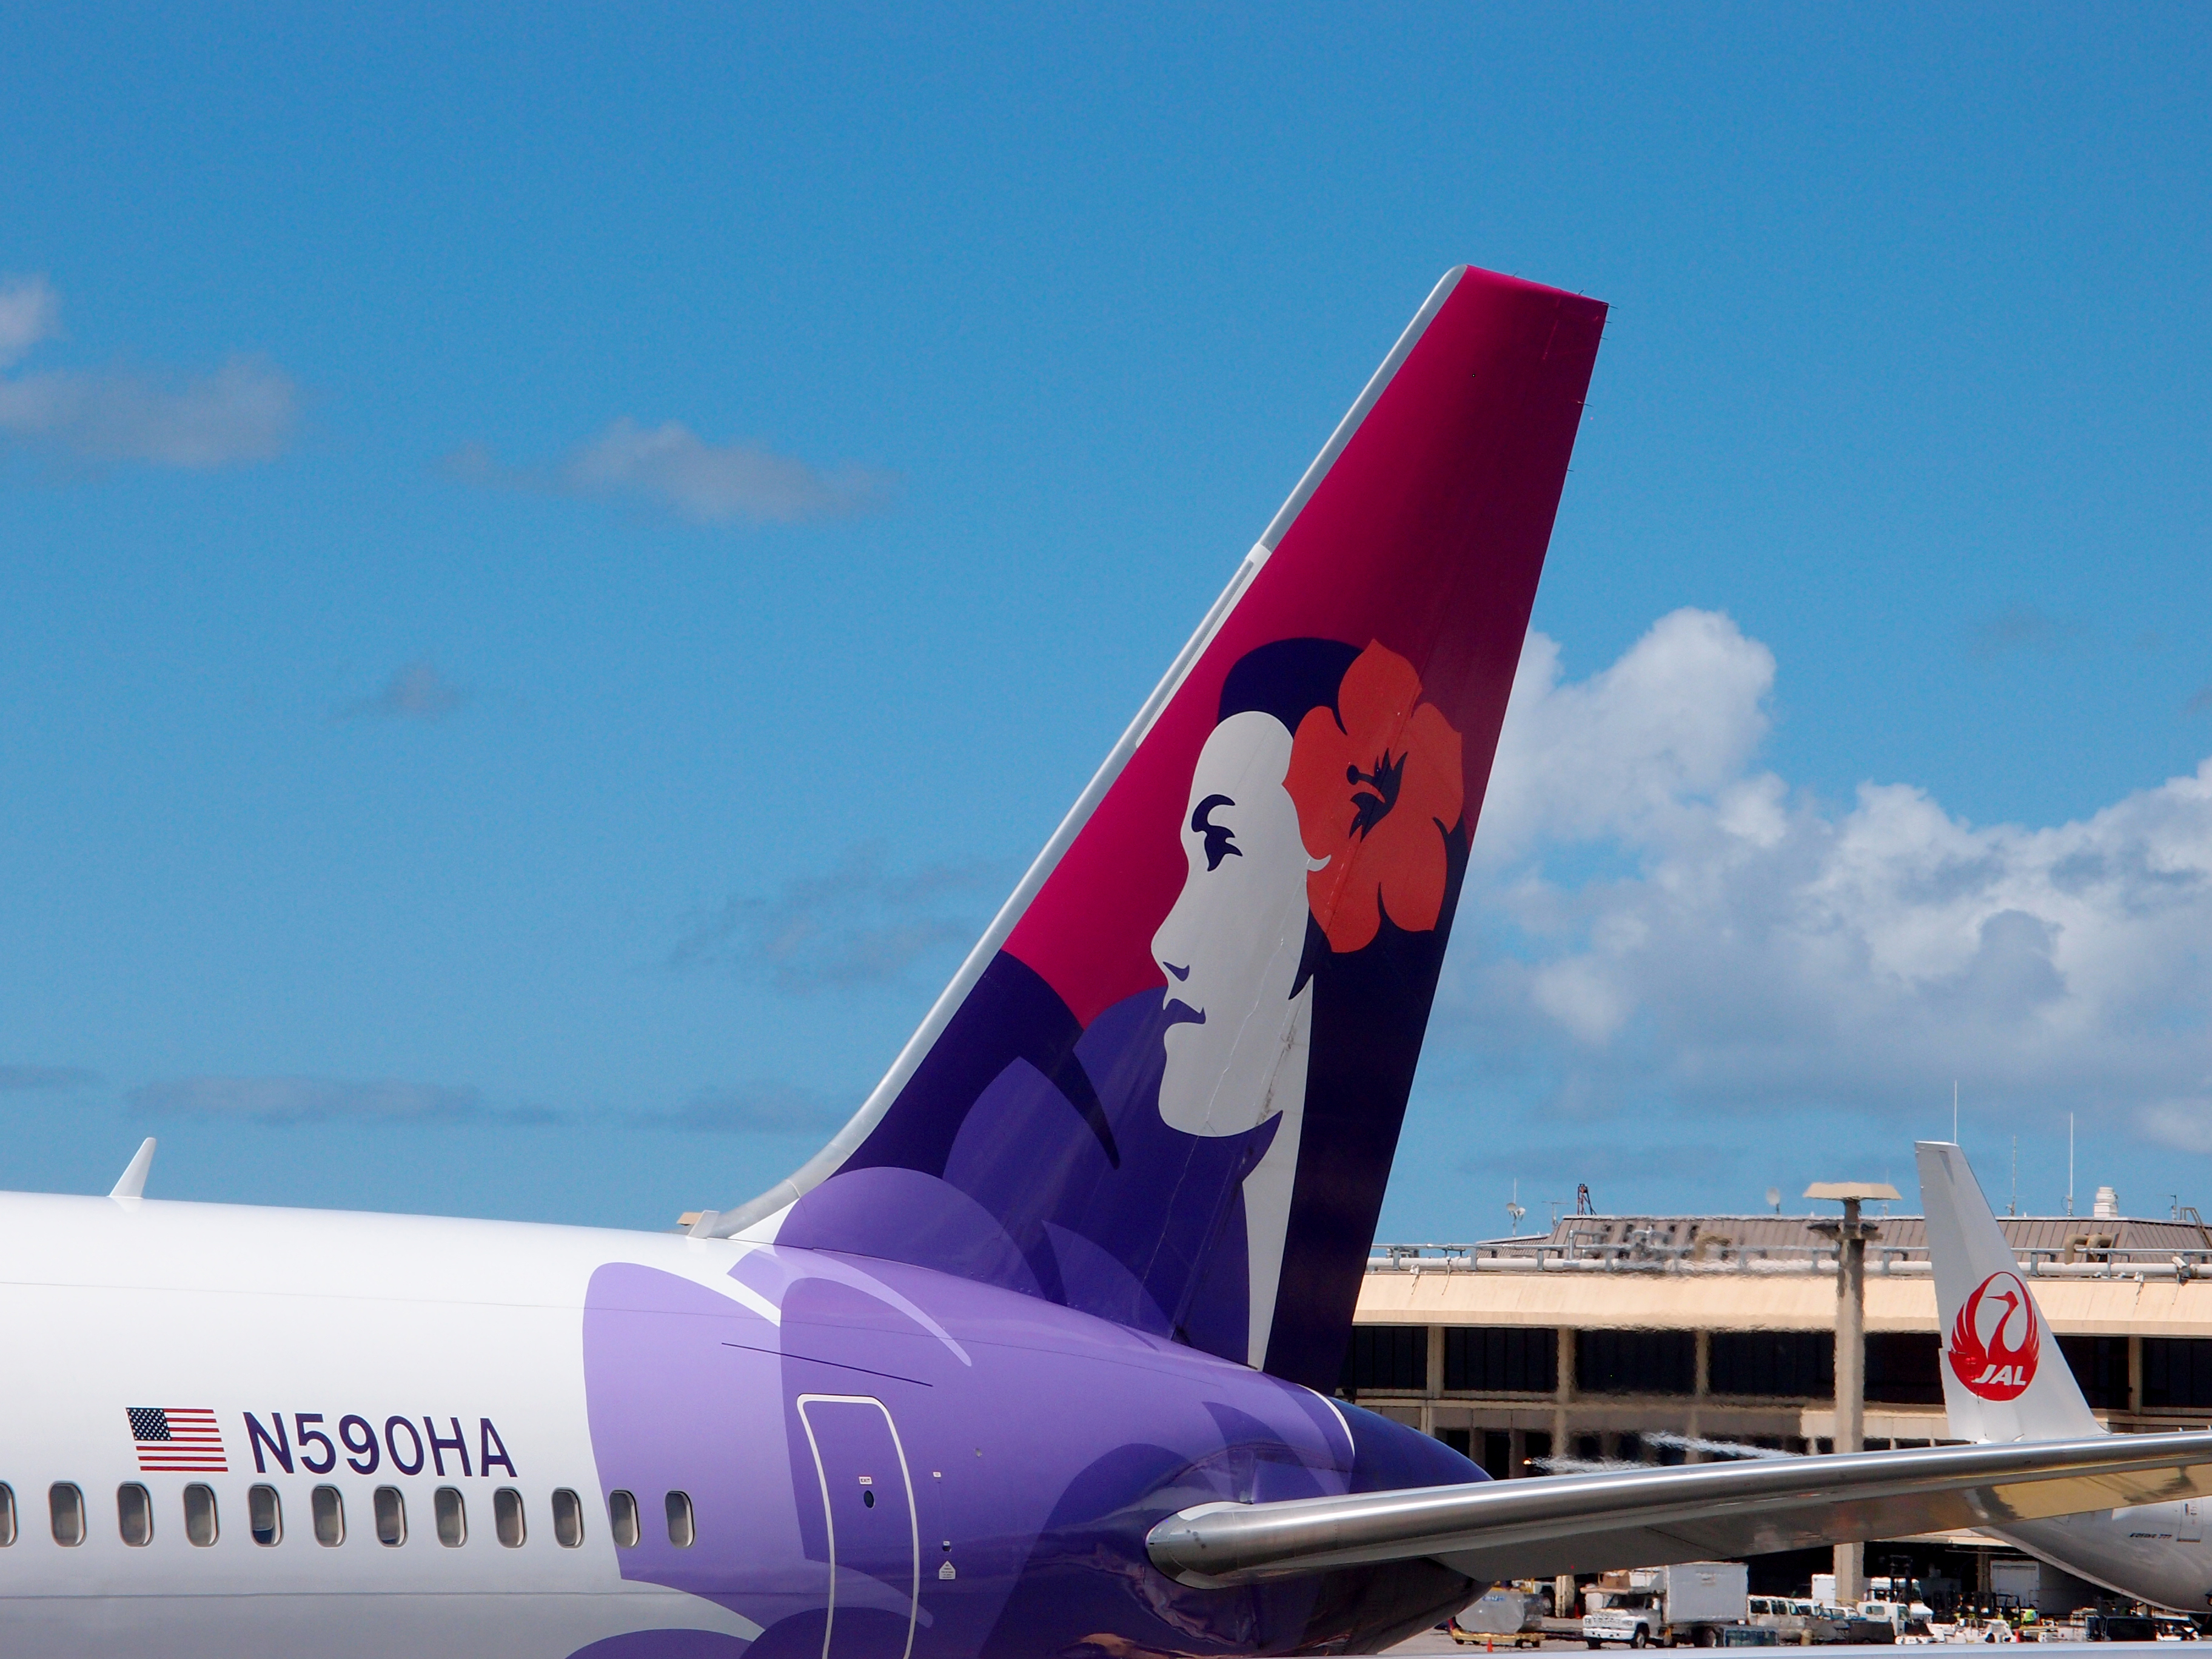 Tails of Hawaiian Airlines and Japan Airlines airplanes